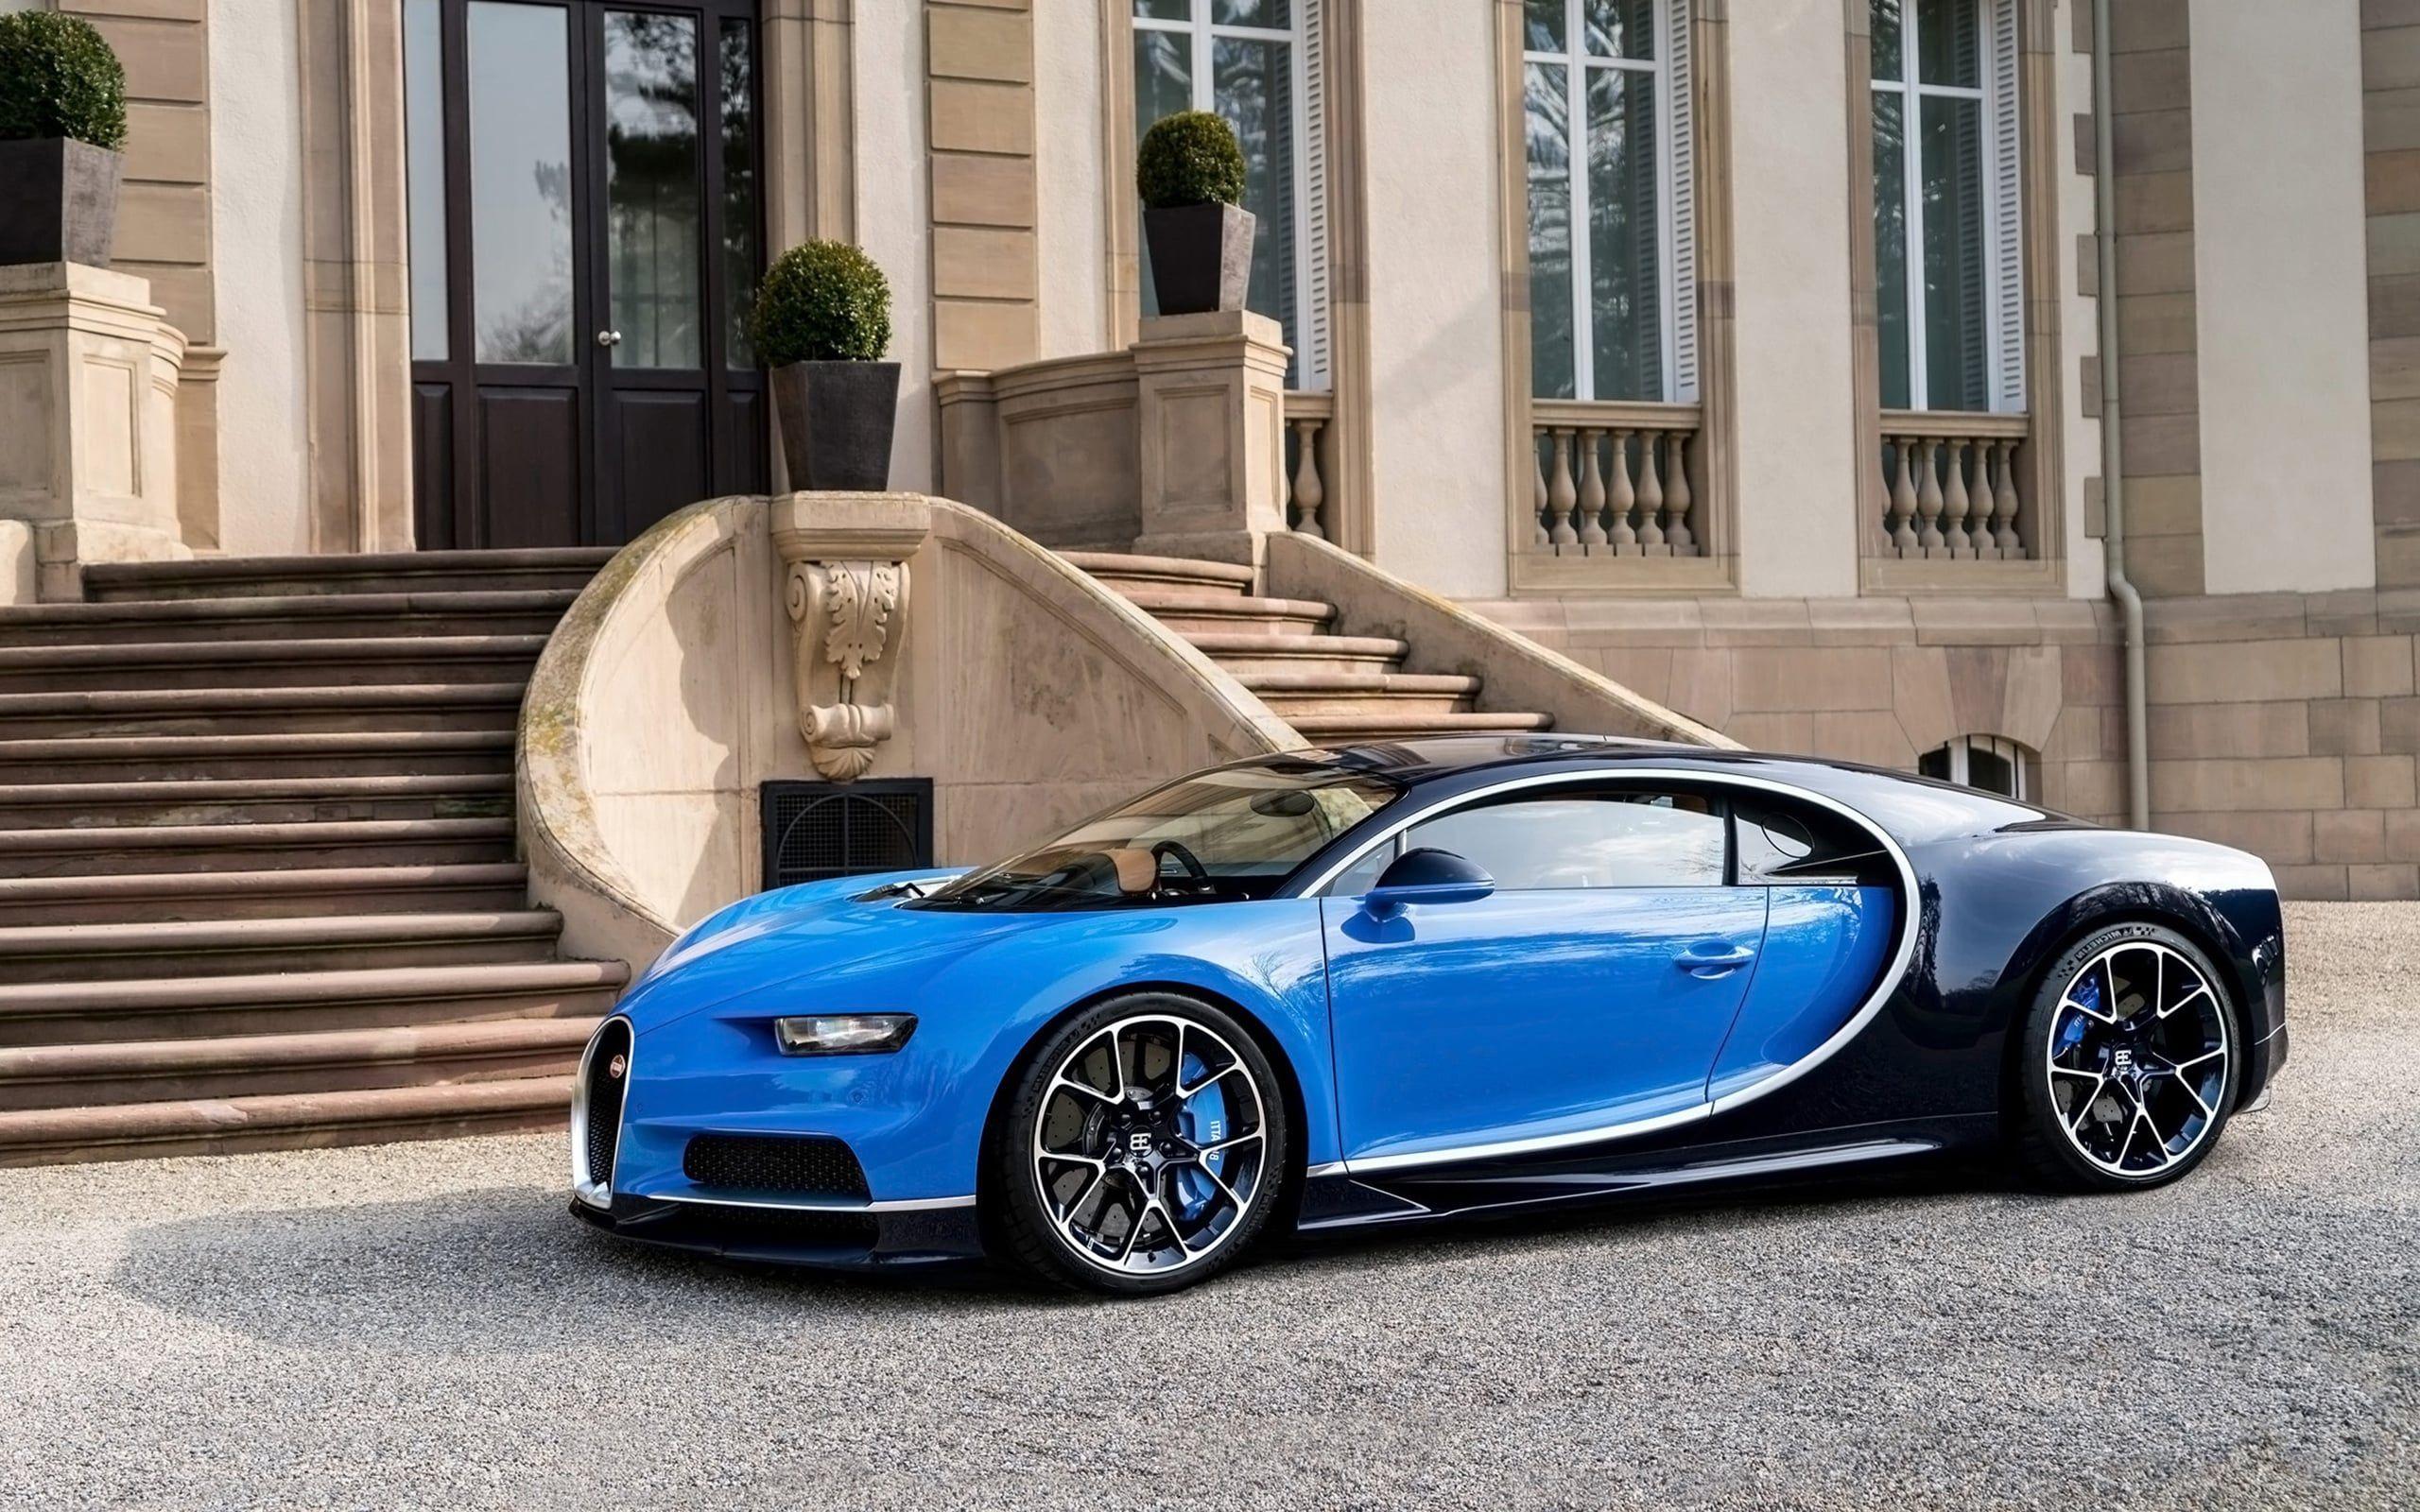 What You Should Know About The 2017 Bugatti Chiron Car List